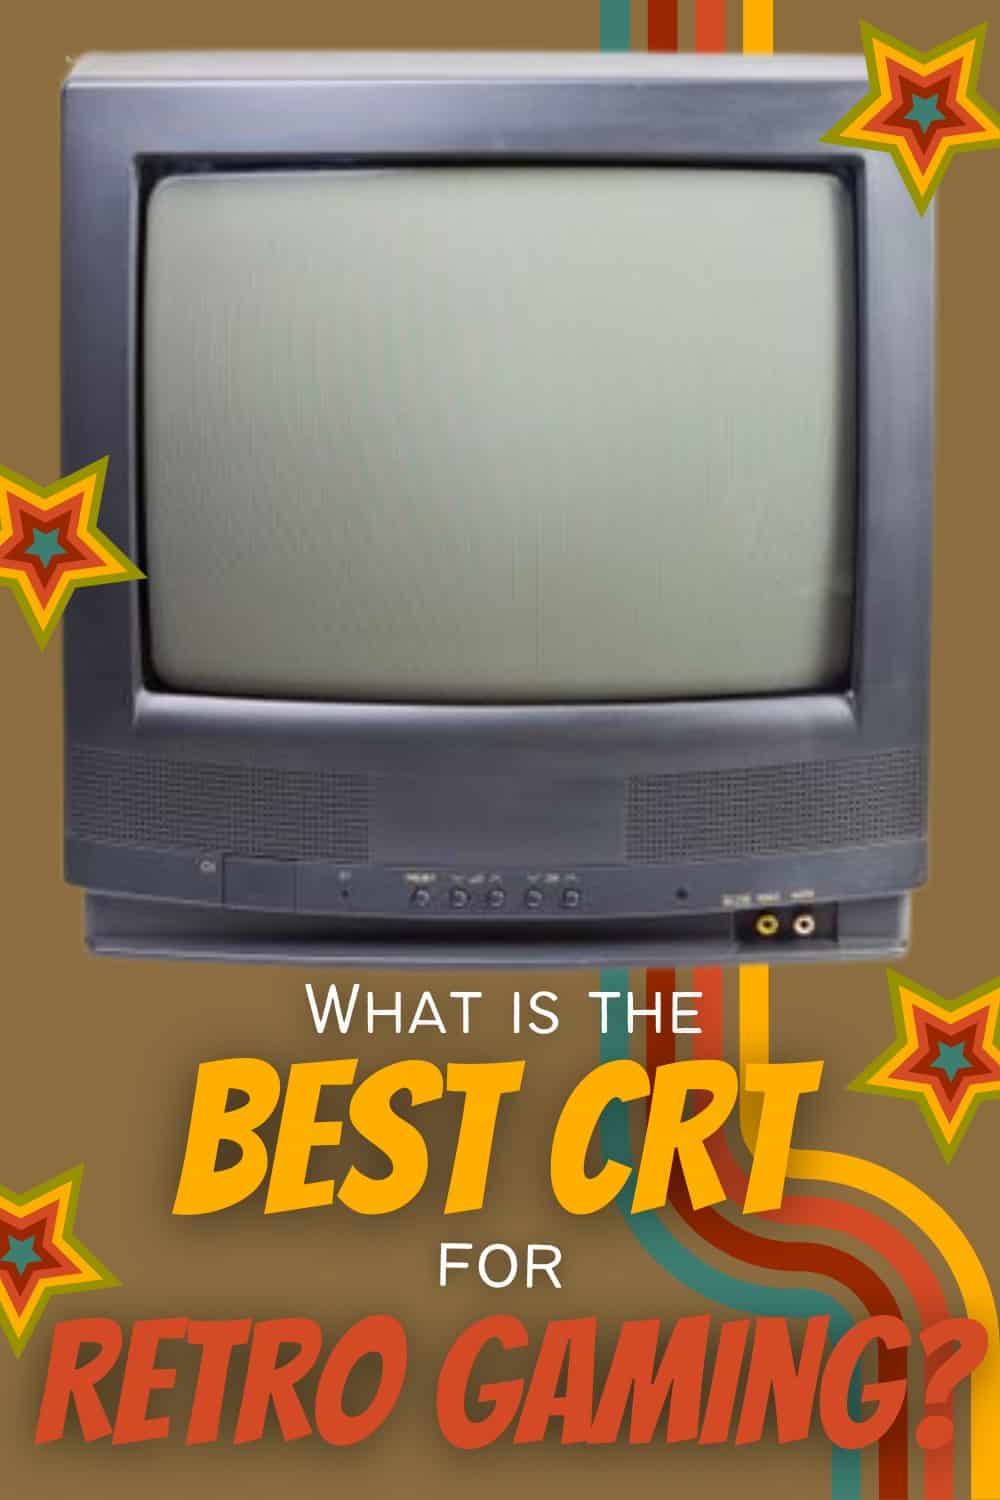 Sony PVM-14M2U the best CRT TV for retro gaming